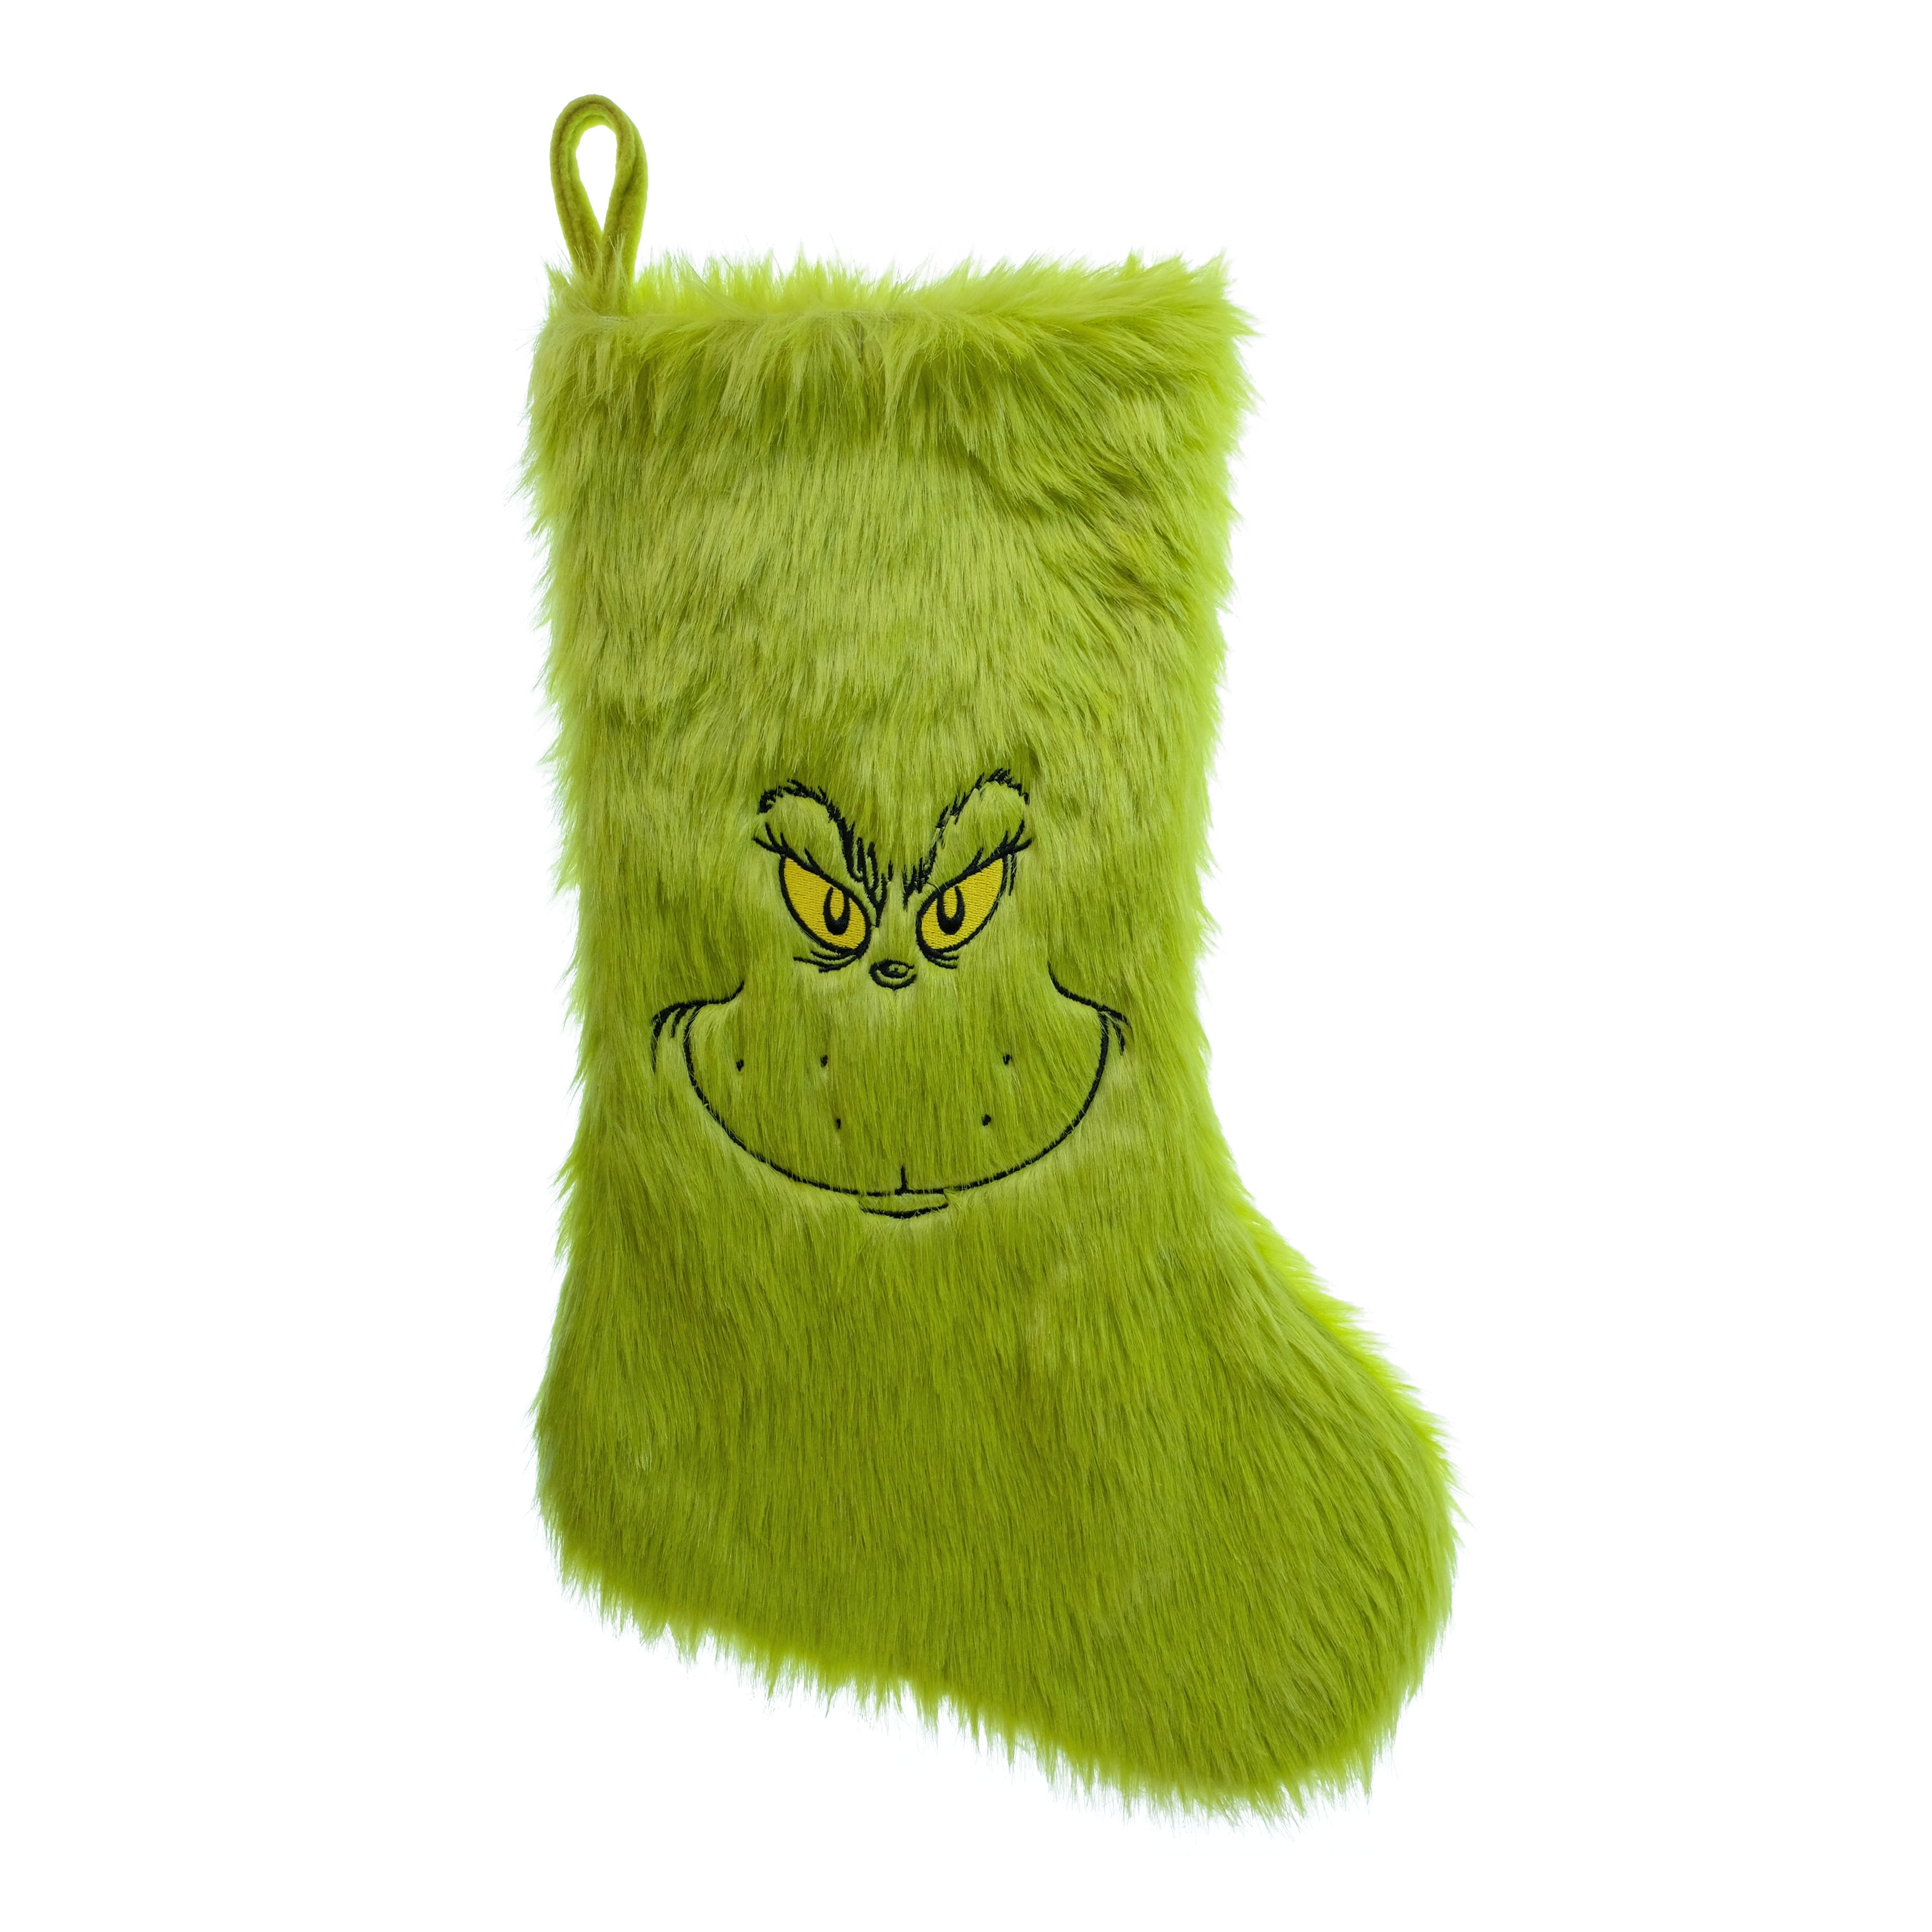 Dr. Seuss' The Grinch Who Stole Christmas Dr Seuss' The Grinch Who Stole Christmas, Grinch Furry Stocking, 20 inches Tall, Grinch Green